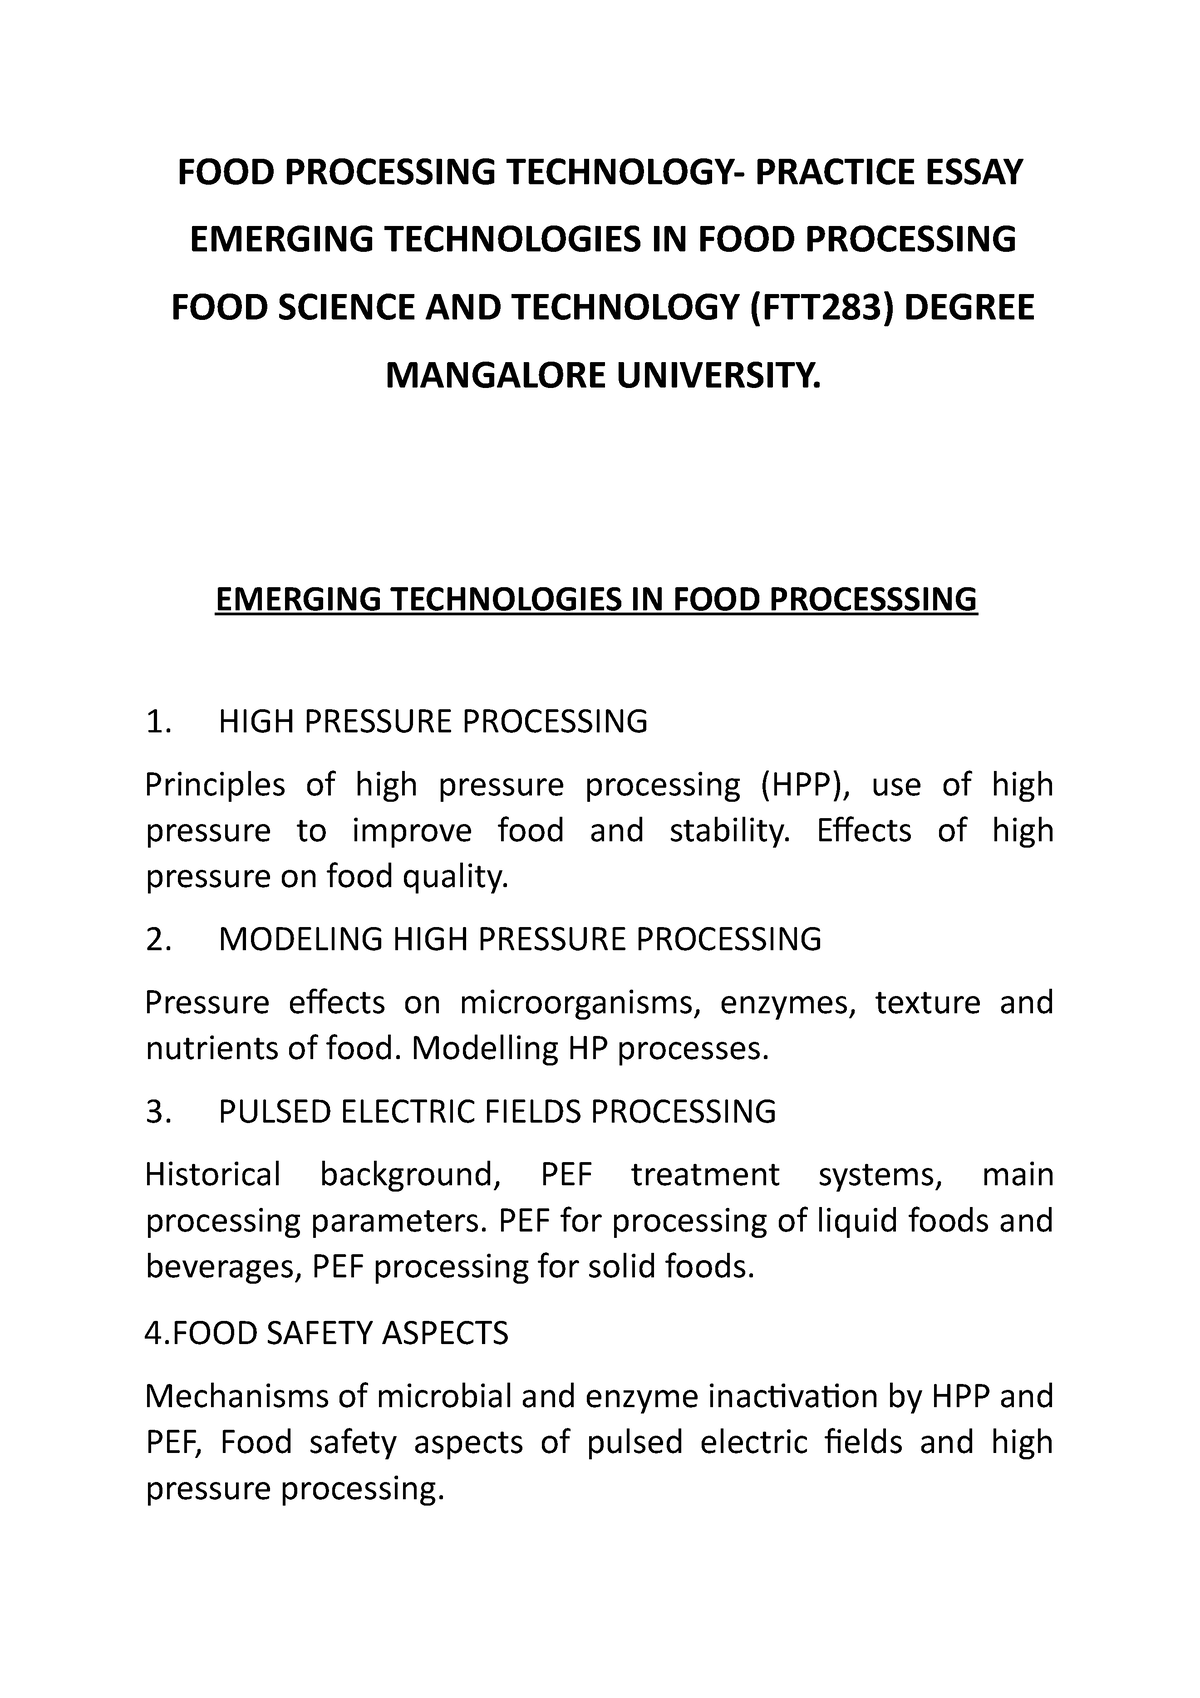 essay for food processing